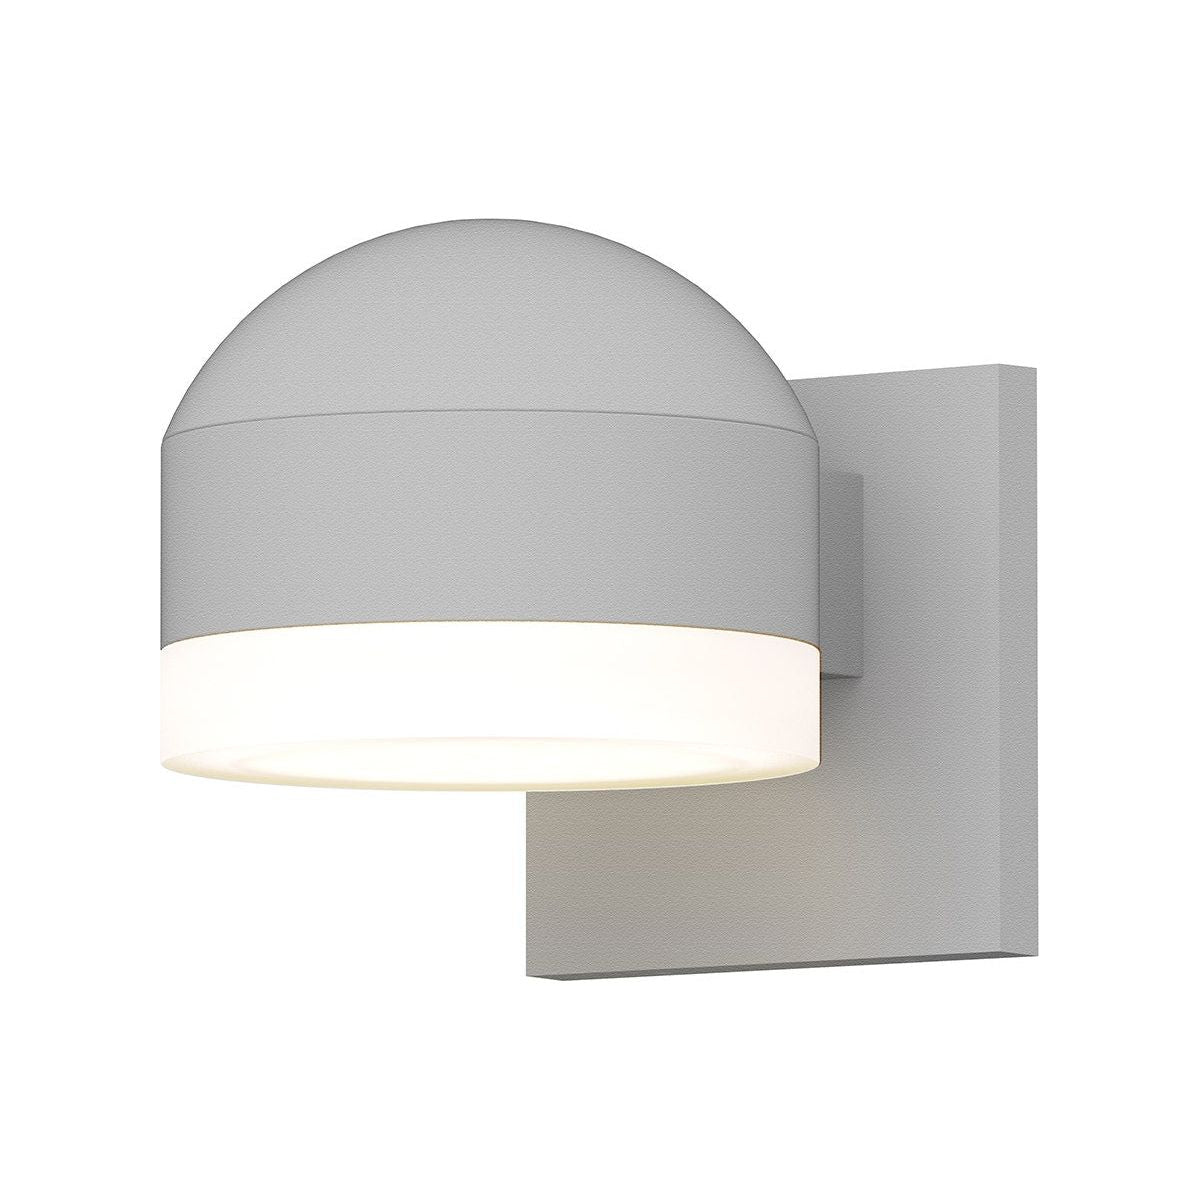 REALS Downlight LED Sconce with Dome Cap and Cylinder Lens